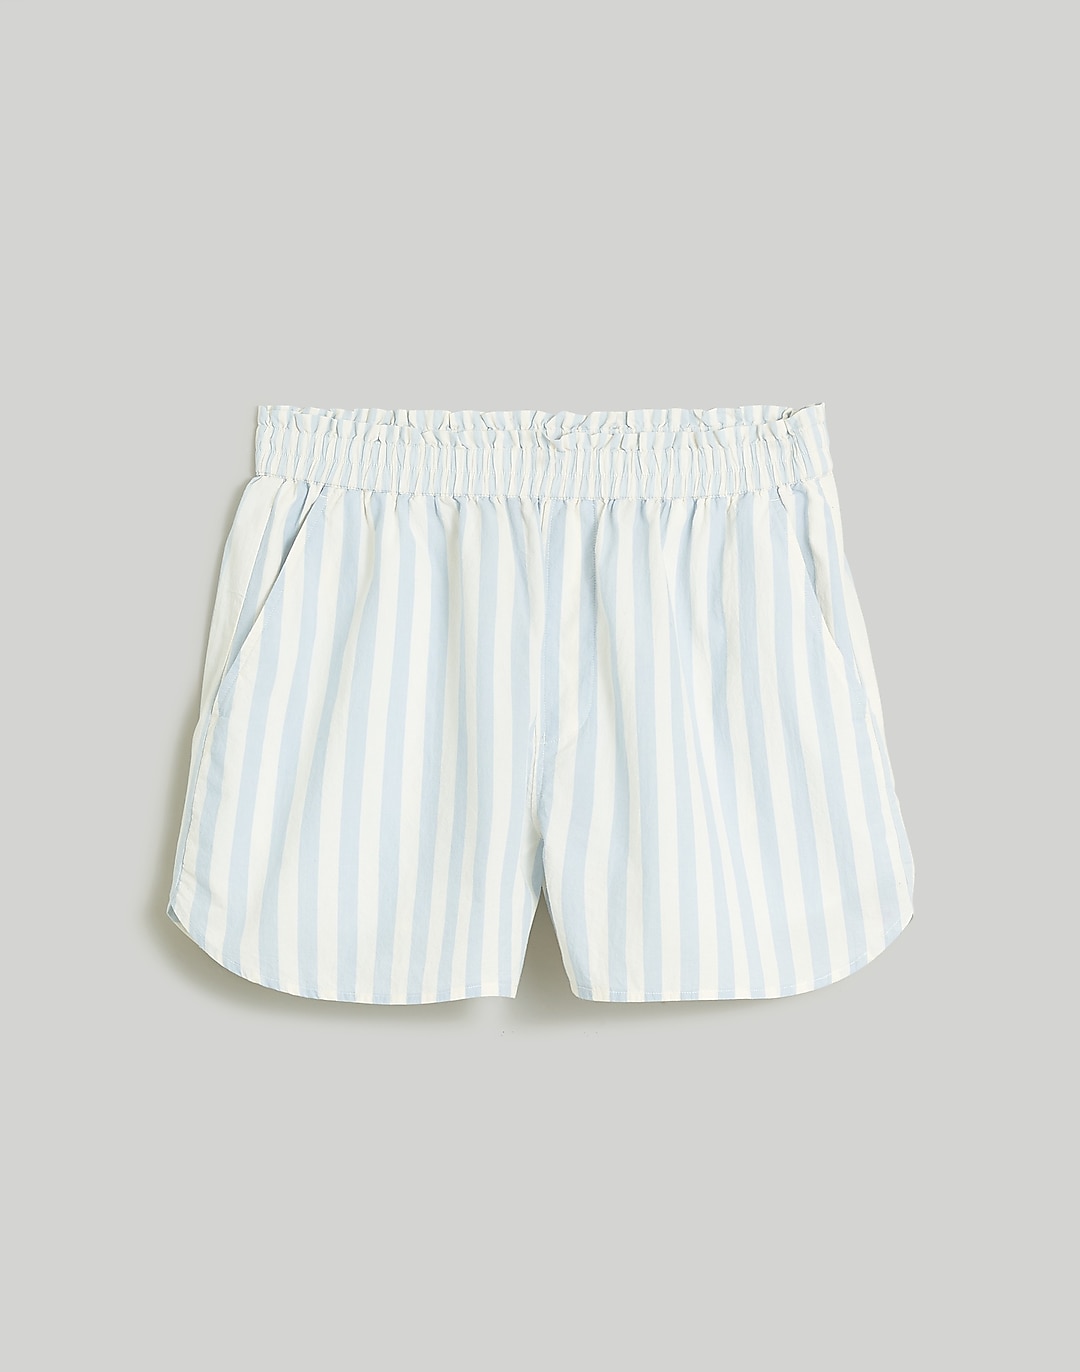 Pull-On Shorts in Striped Signature Poplin | Madewell